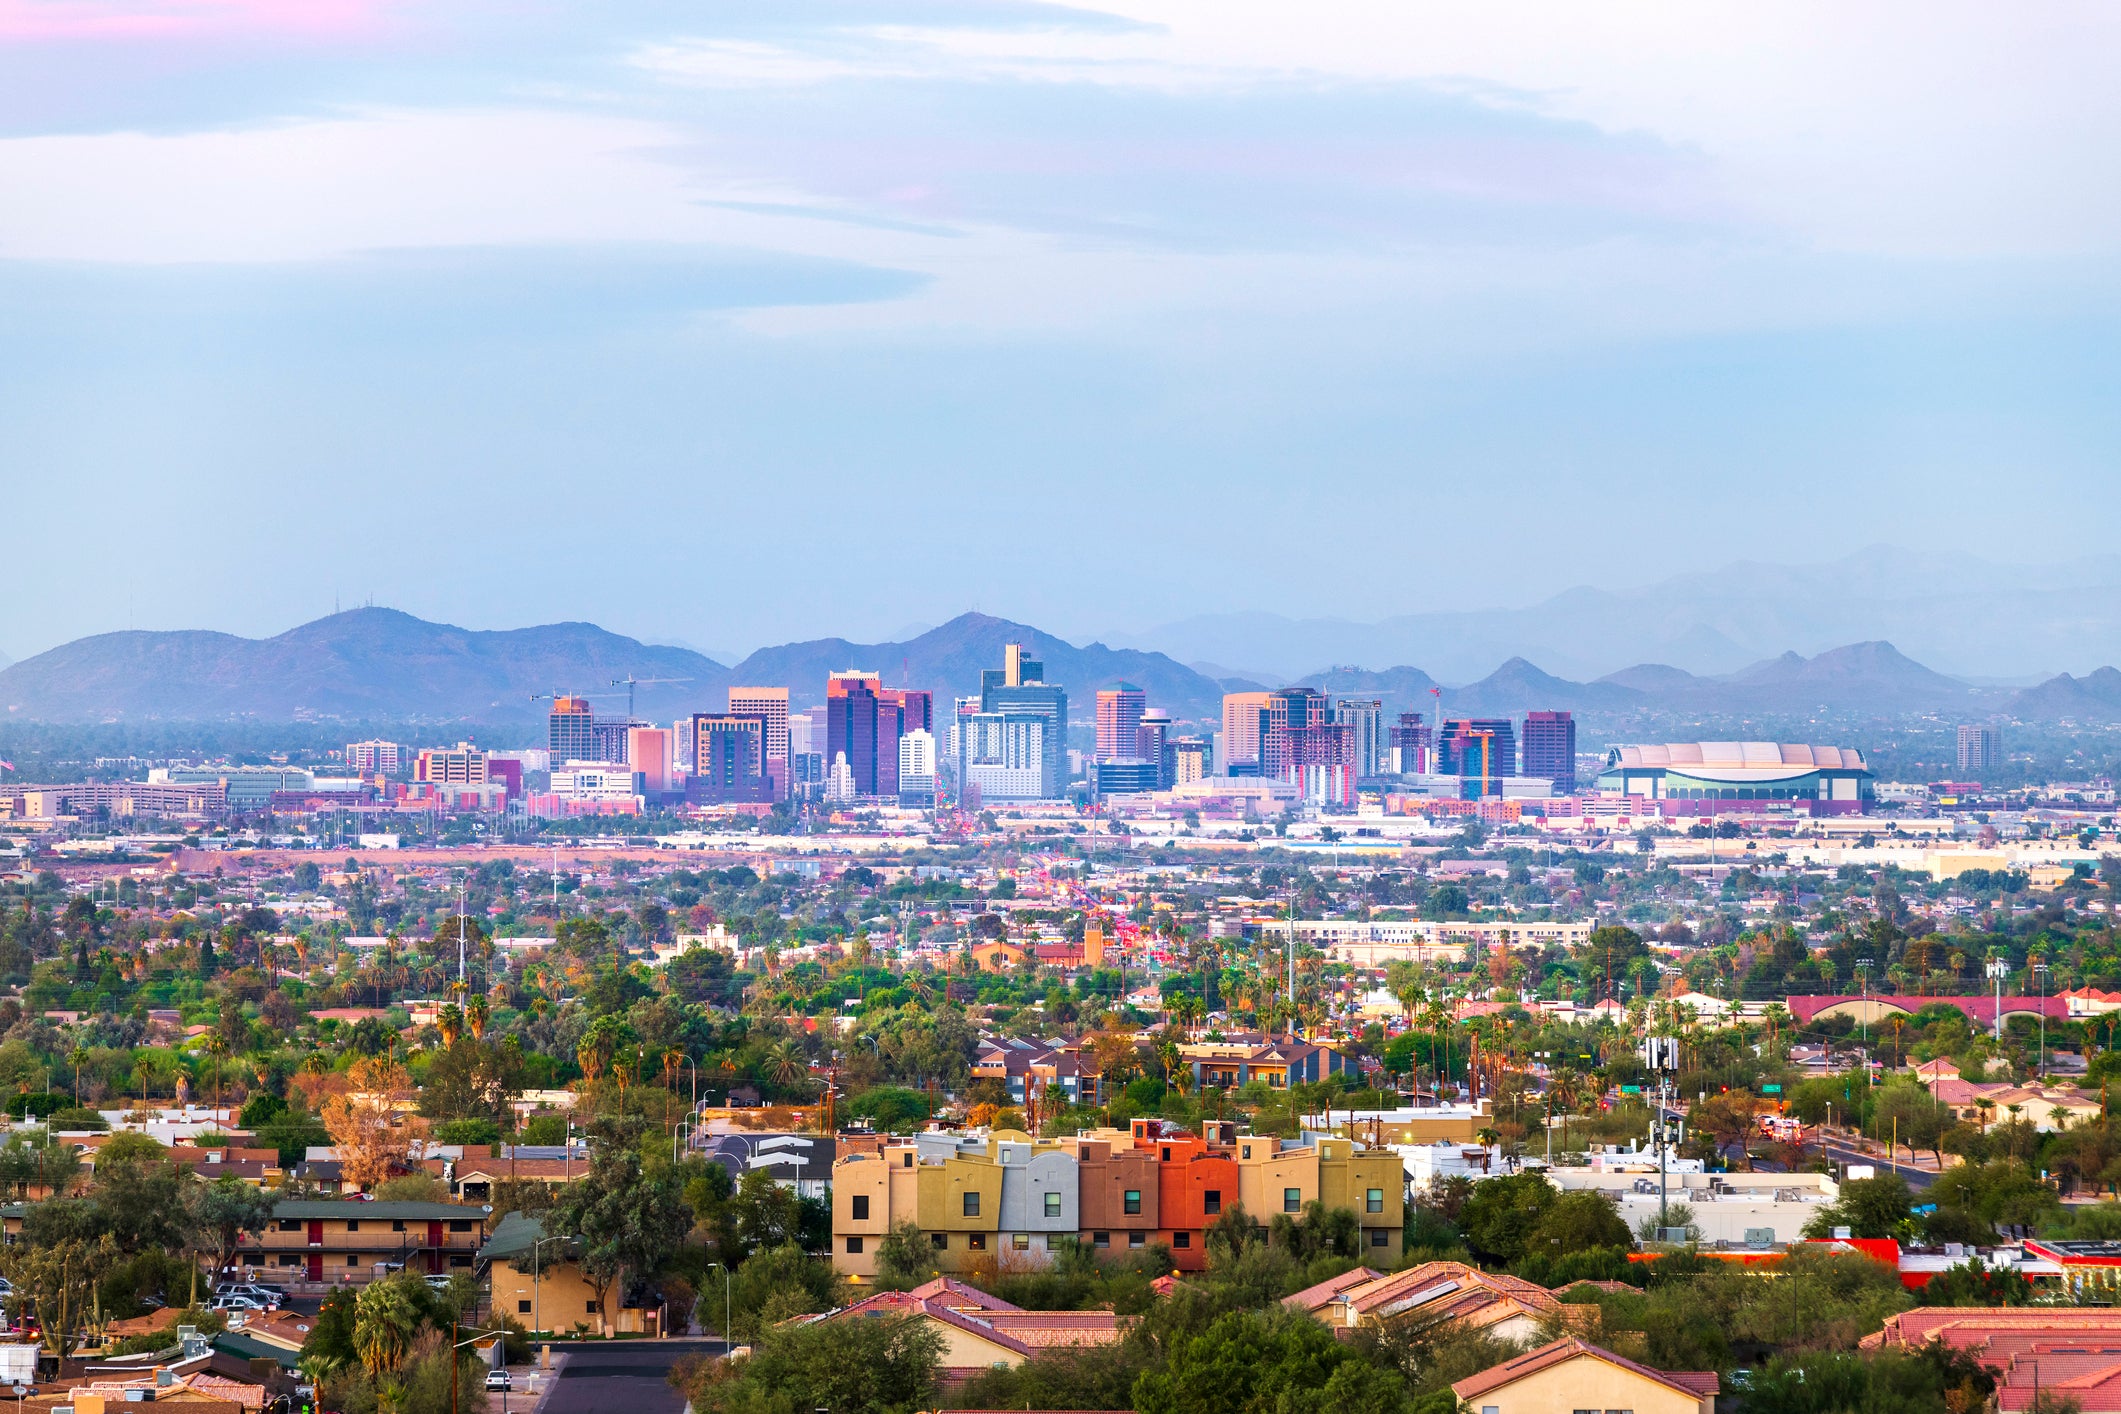 Four of the sprawling suburbs of Phoenix, Arizona saw huge home price increases